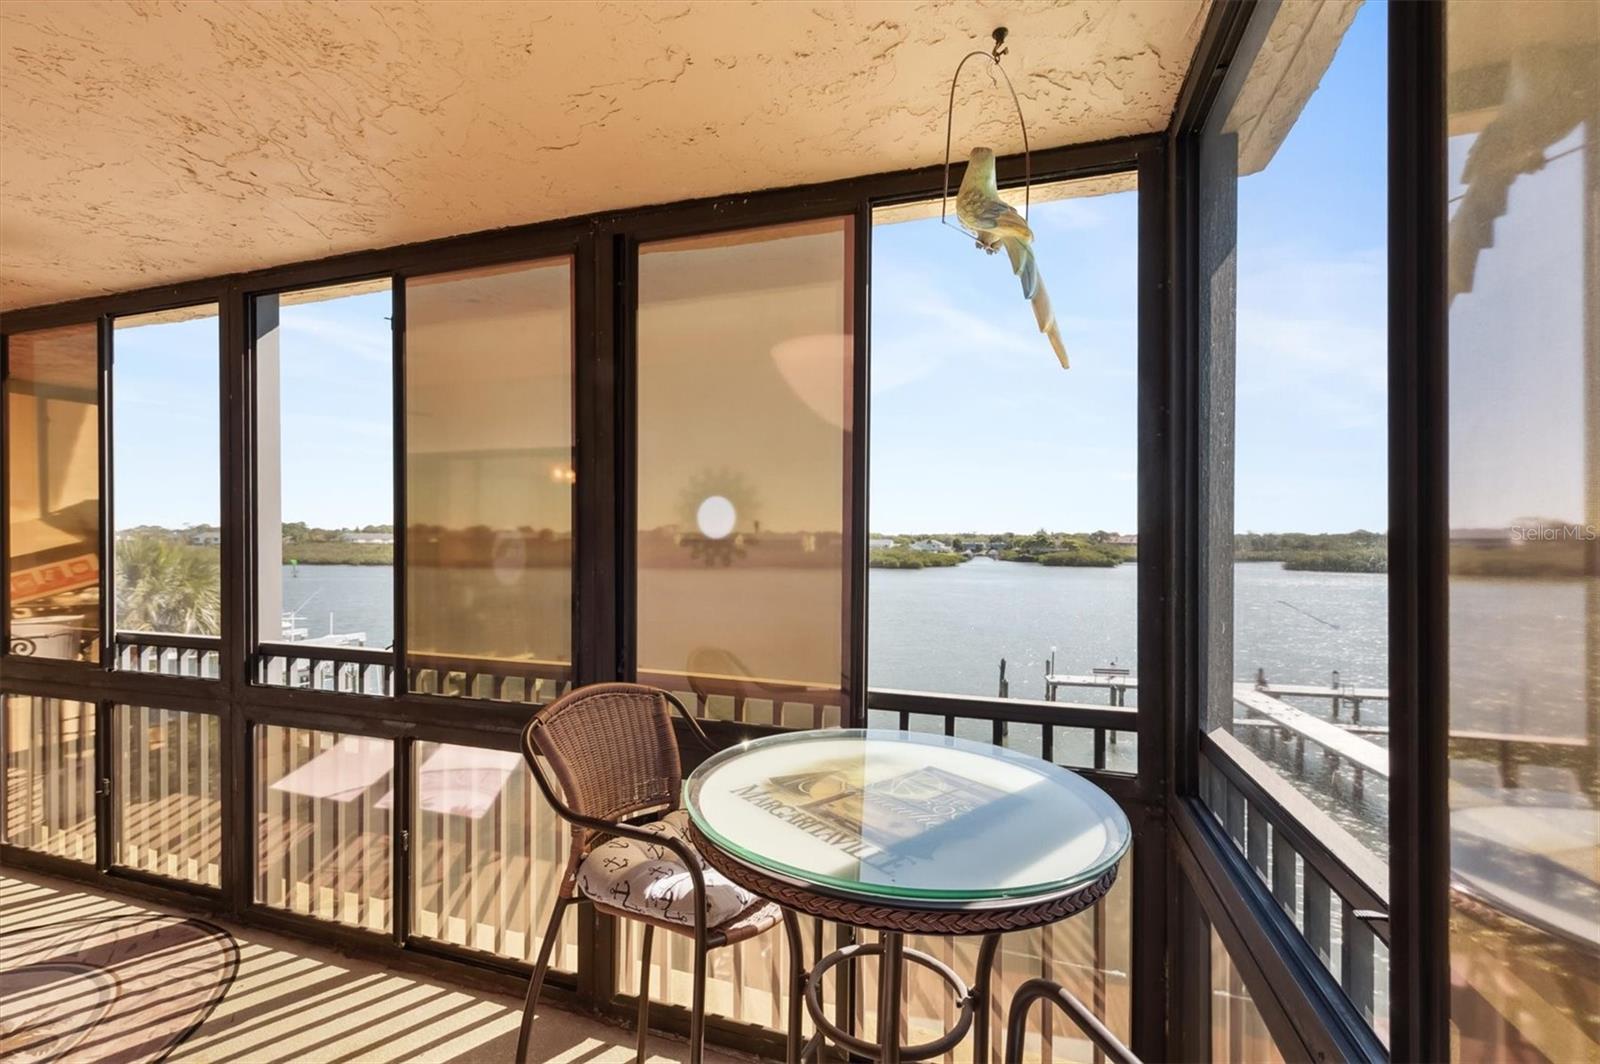 DIRECT VIEWS OF INTRACOASTAL WATERWAY!